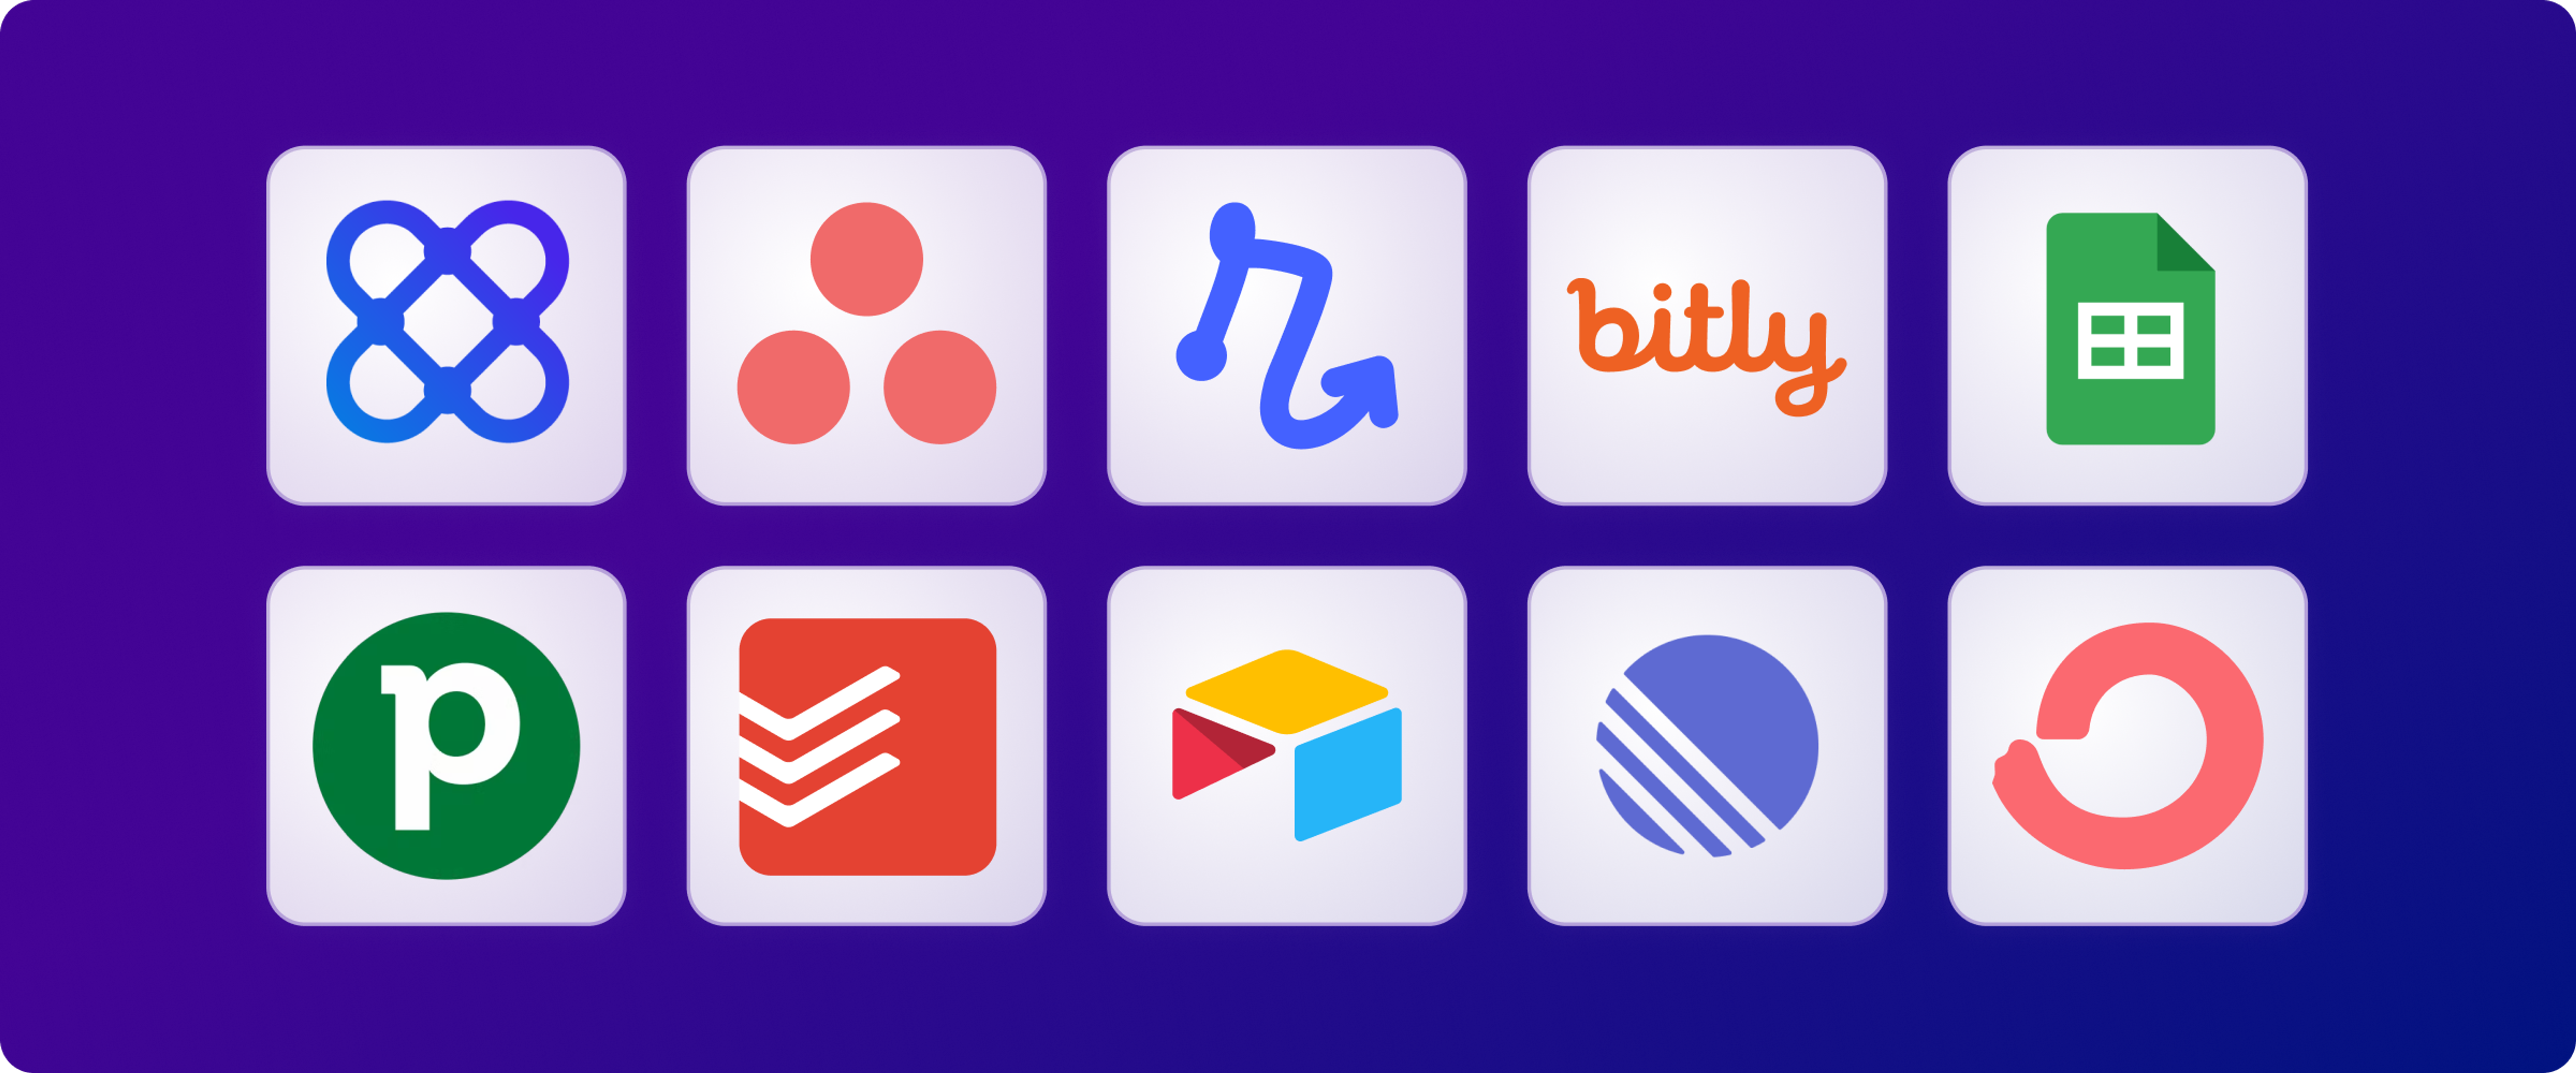 New Relay.app integrations across 9 apps, including Affinity, Airtable, Asana, Bitly, ConvertKit, Google Sheets, Linear, Pipedrive and Todoist